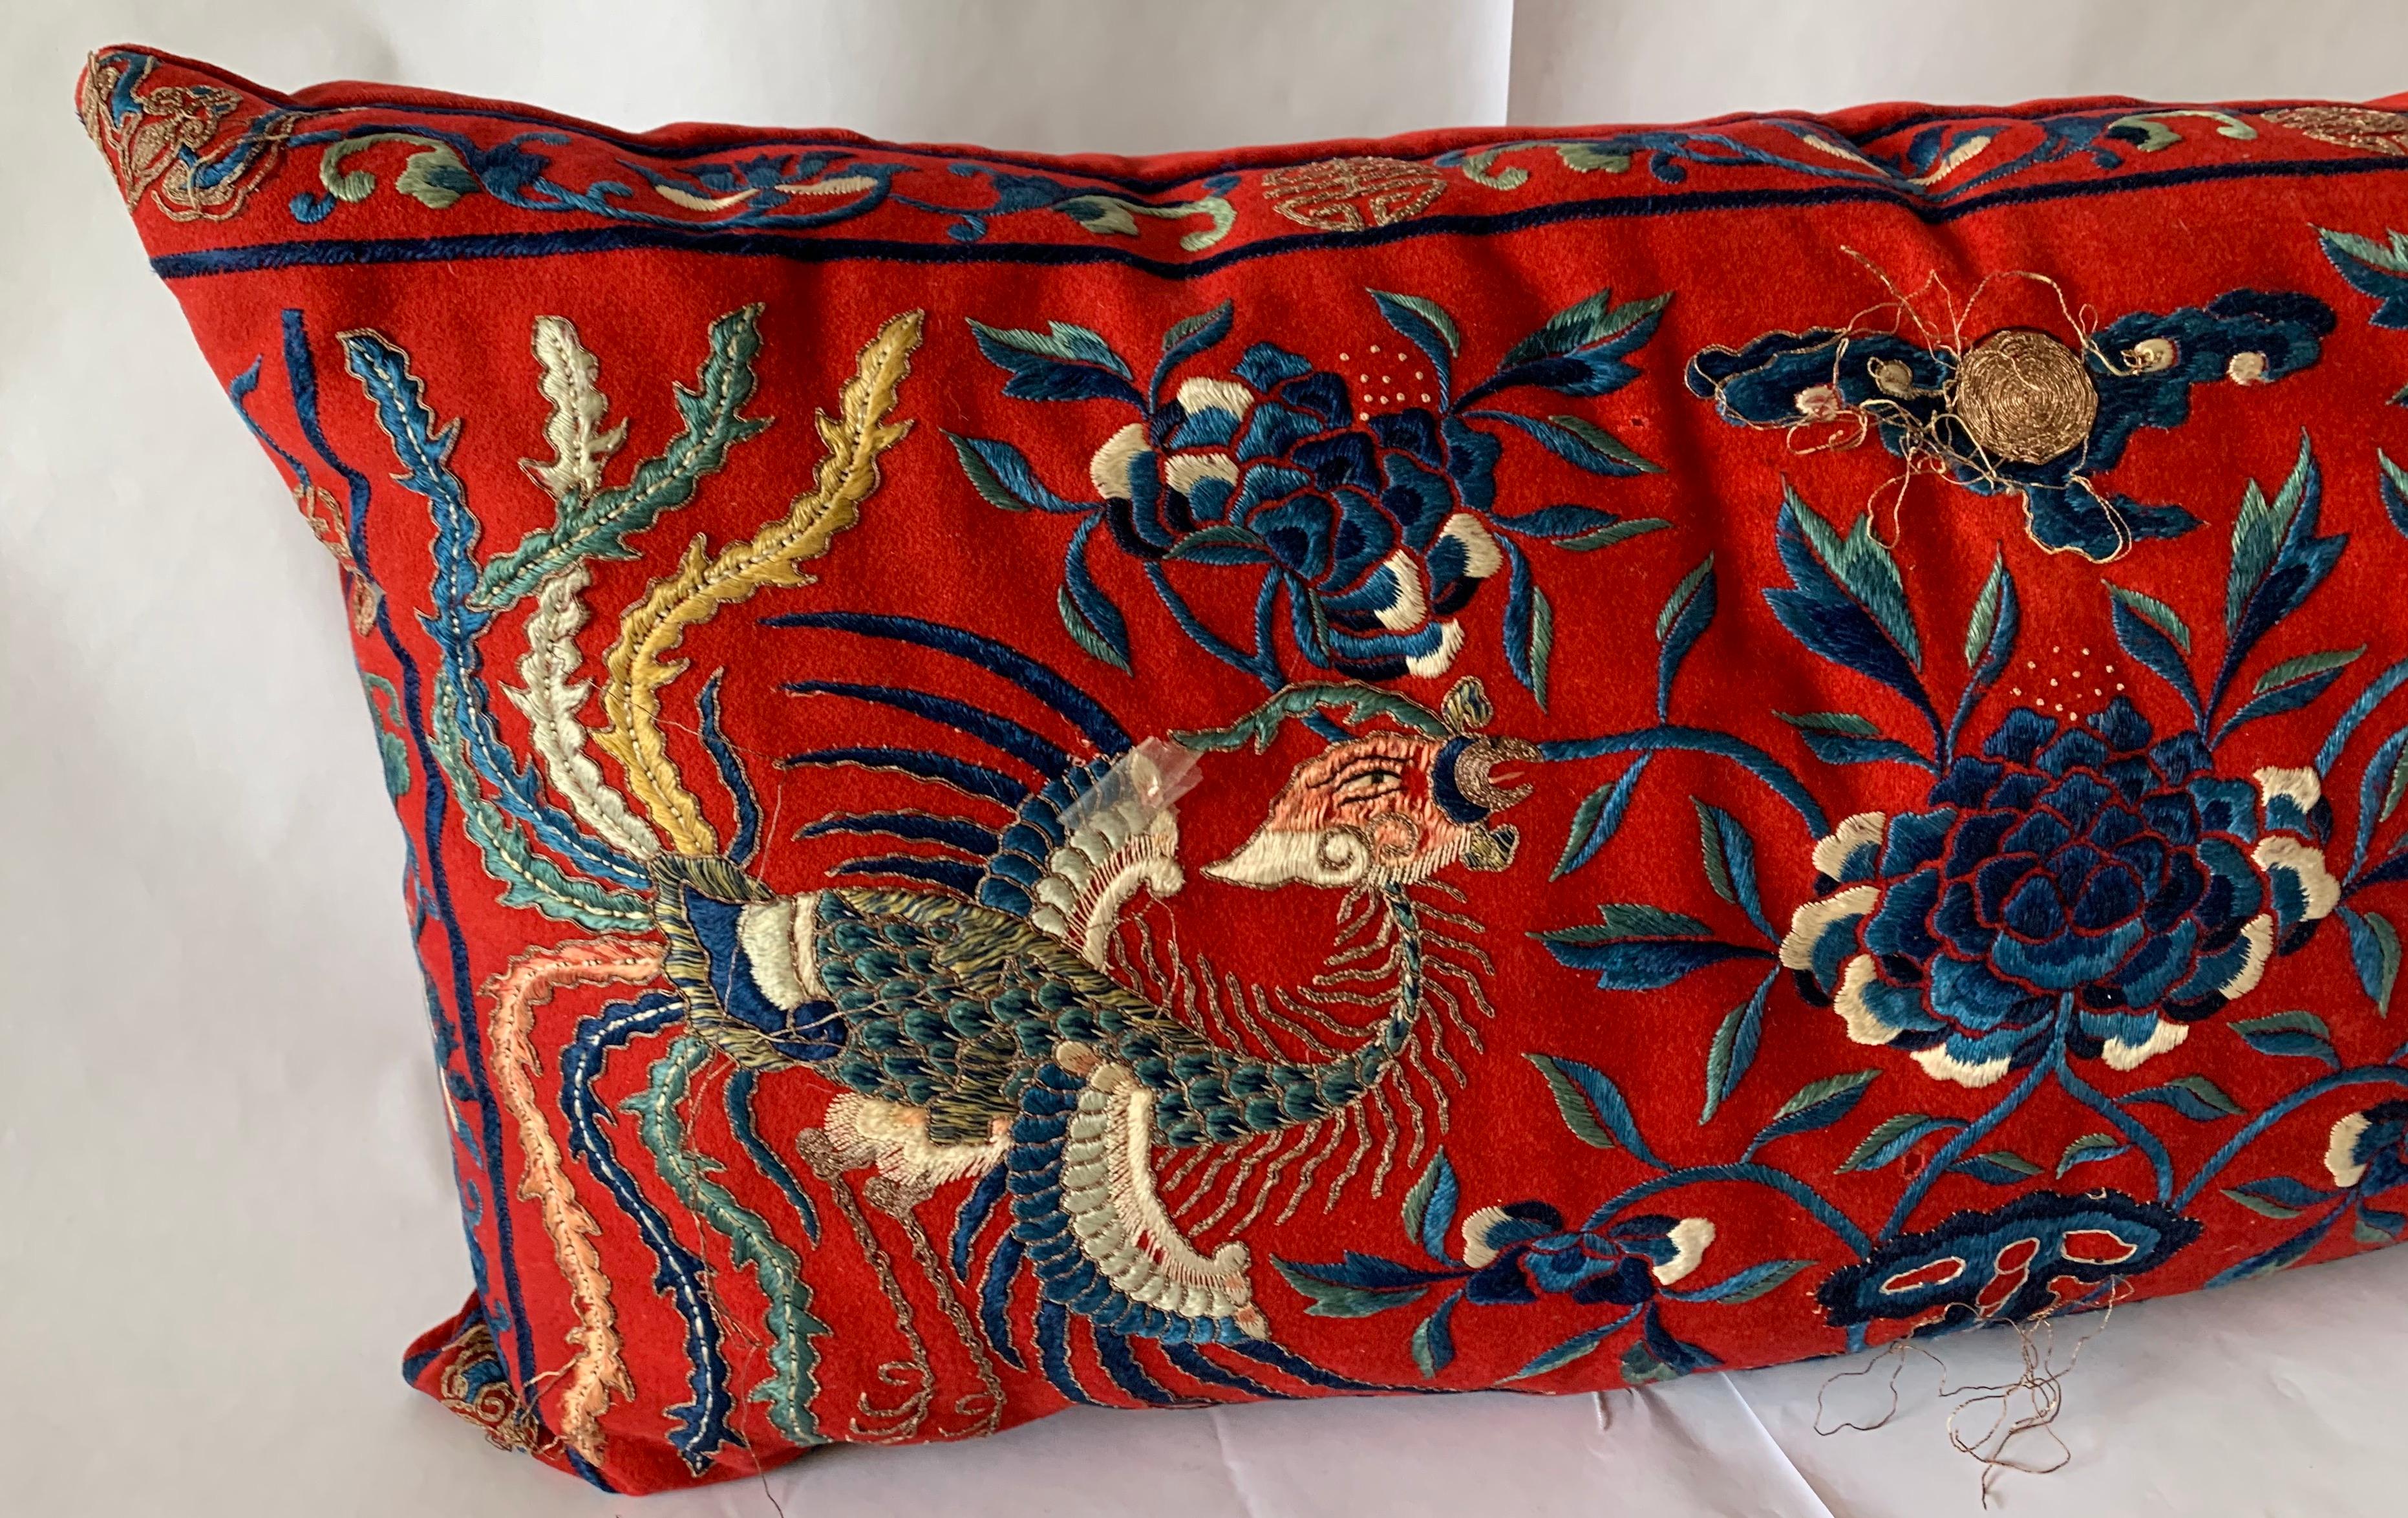 Antique Chinese embroidered textile made into a custom lumbar pillow. Red wool embroidered textile with gold couching (threading) and backed in red velvet.